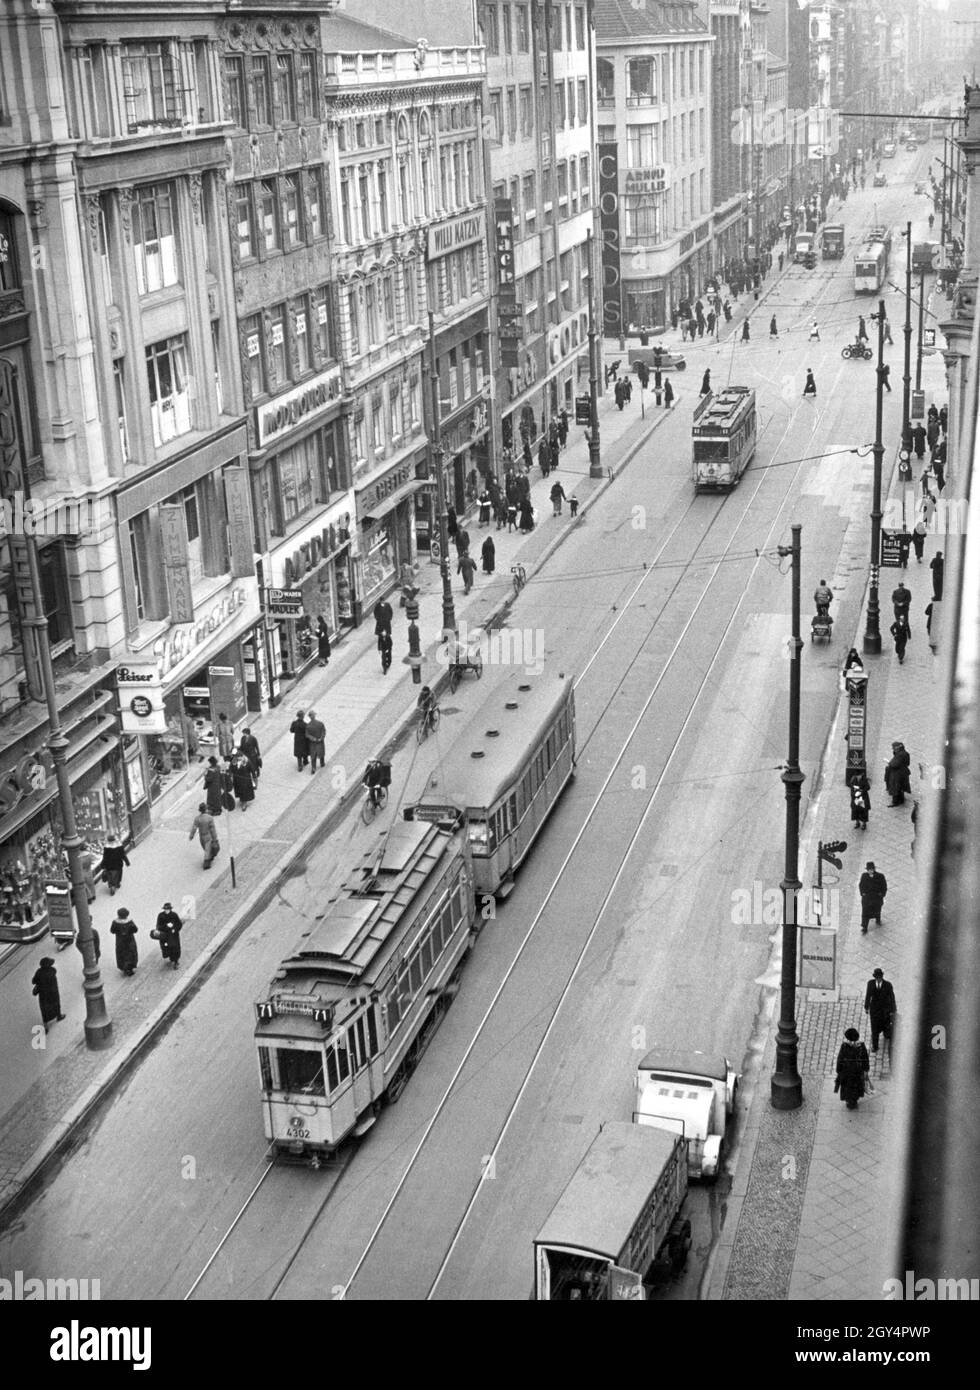 Trams (including line 71 to Friedenau) travel on Leipziger Strasse in Berlin -Mitte on January 25, 1938. The view is from Friedrichstrasse in the  direction of Charlottenstrasse and Dönhoffplatz (today:  Marion-Gräfin-Dönhoff-Platz). The street